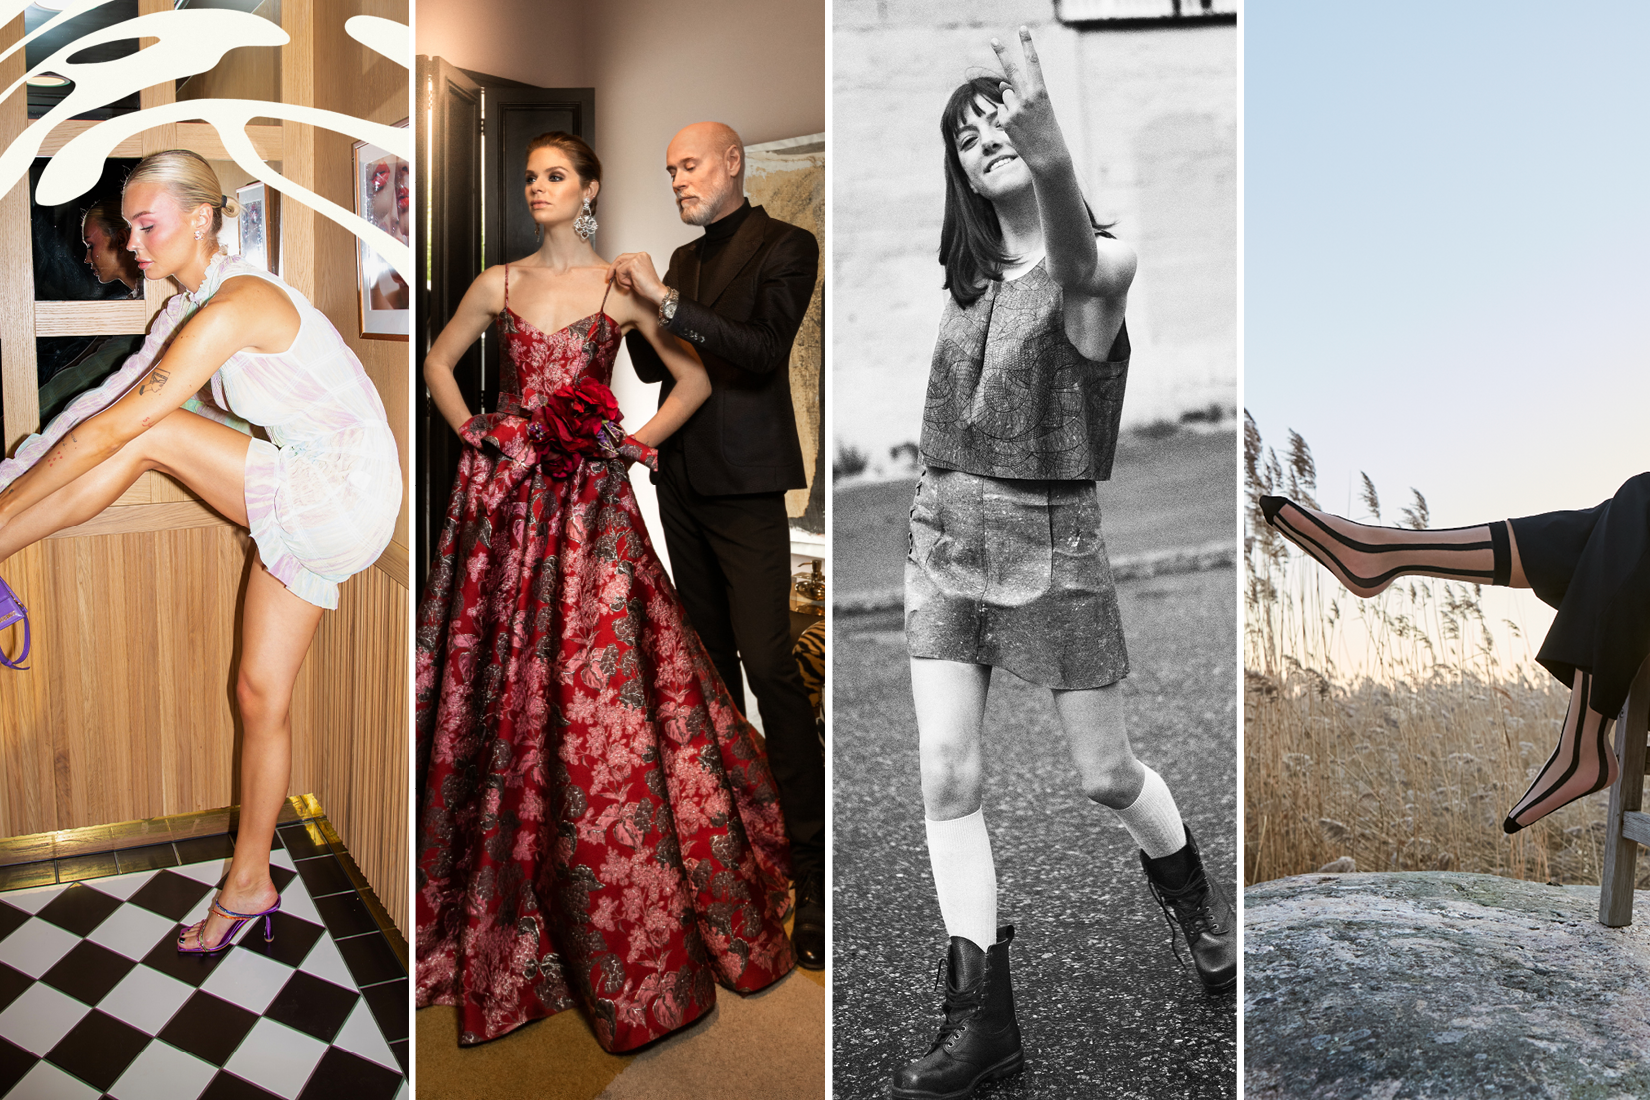 Four pictures of women models wearing fashion creations. To the left, a woman wearing a short white dress in a room with black and white tiling; next, a woman wearing a long ballroom dress with a man by her side; a woman walking in a field in a short skirt and a sleeveless top; to the right, only legs with stockings in the sunset.